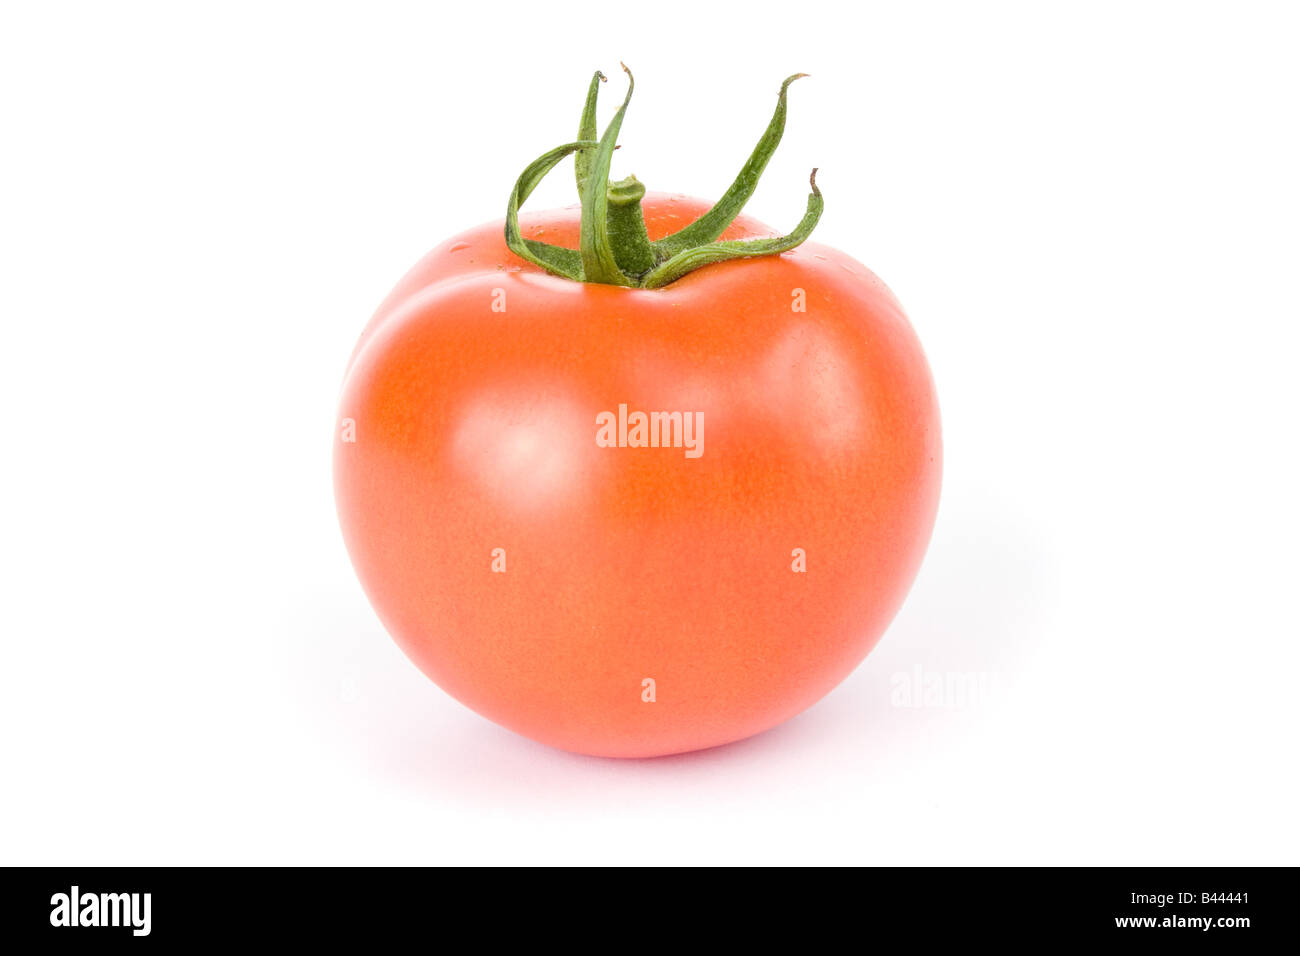 Ripe tomatoes isolated on a white background Stock Photo